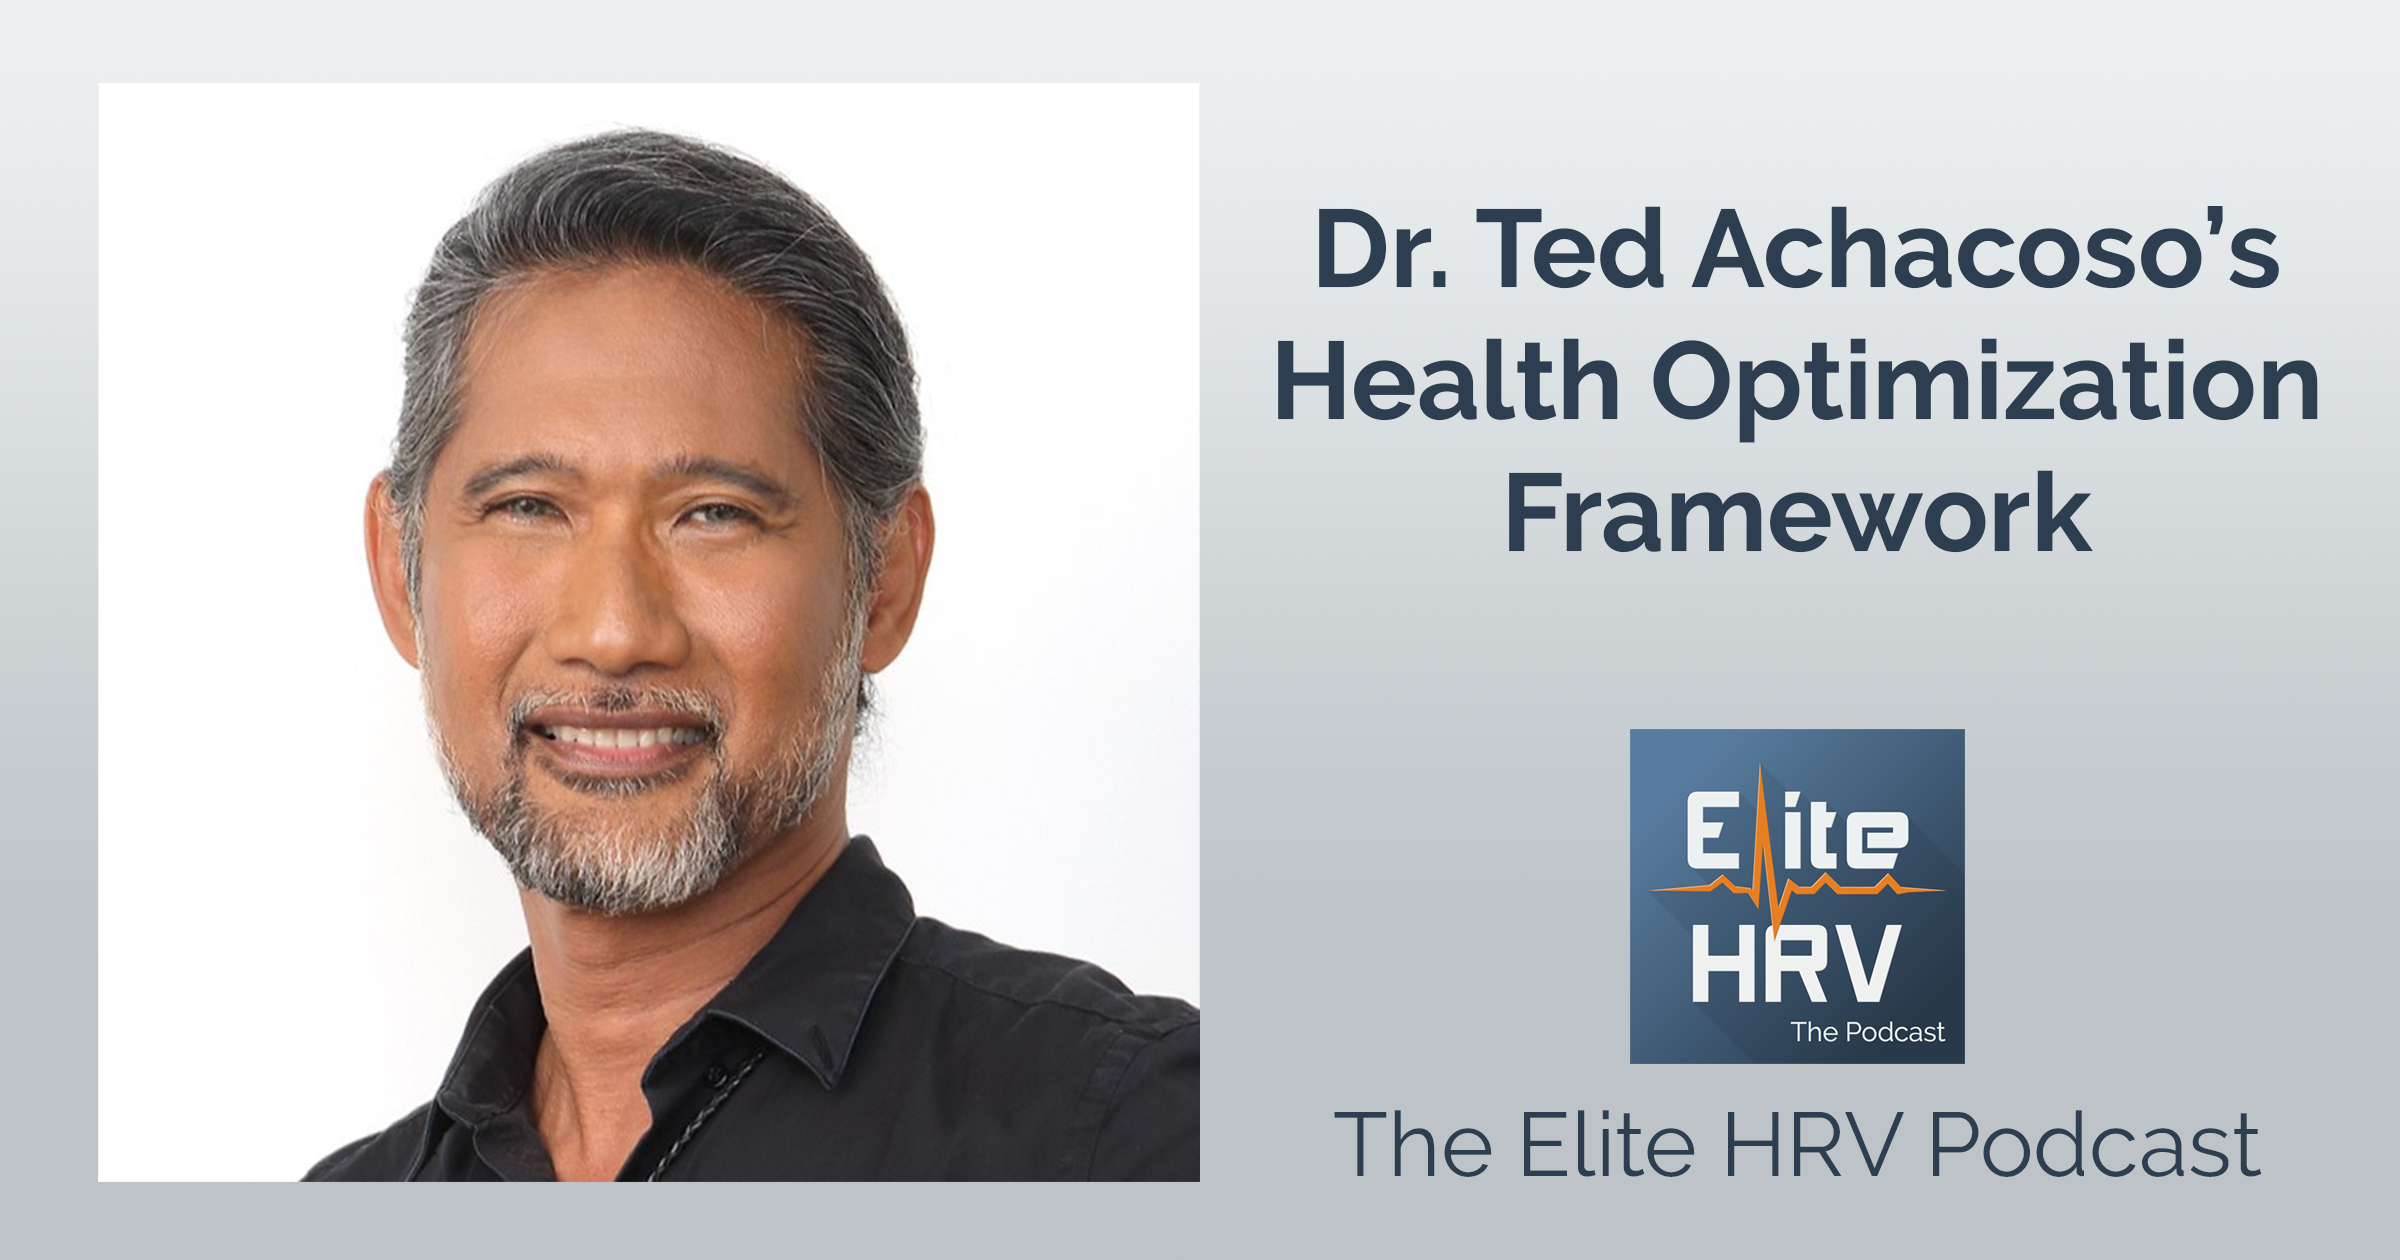 Dr. Ted Achacoso’s Health Optimization Framework